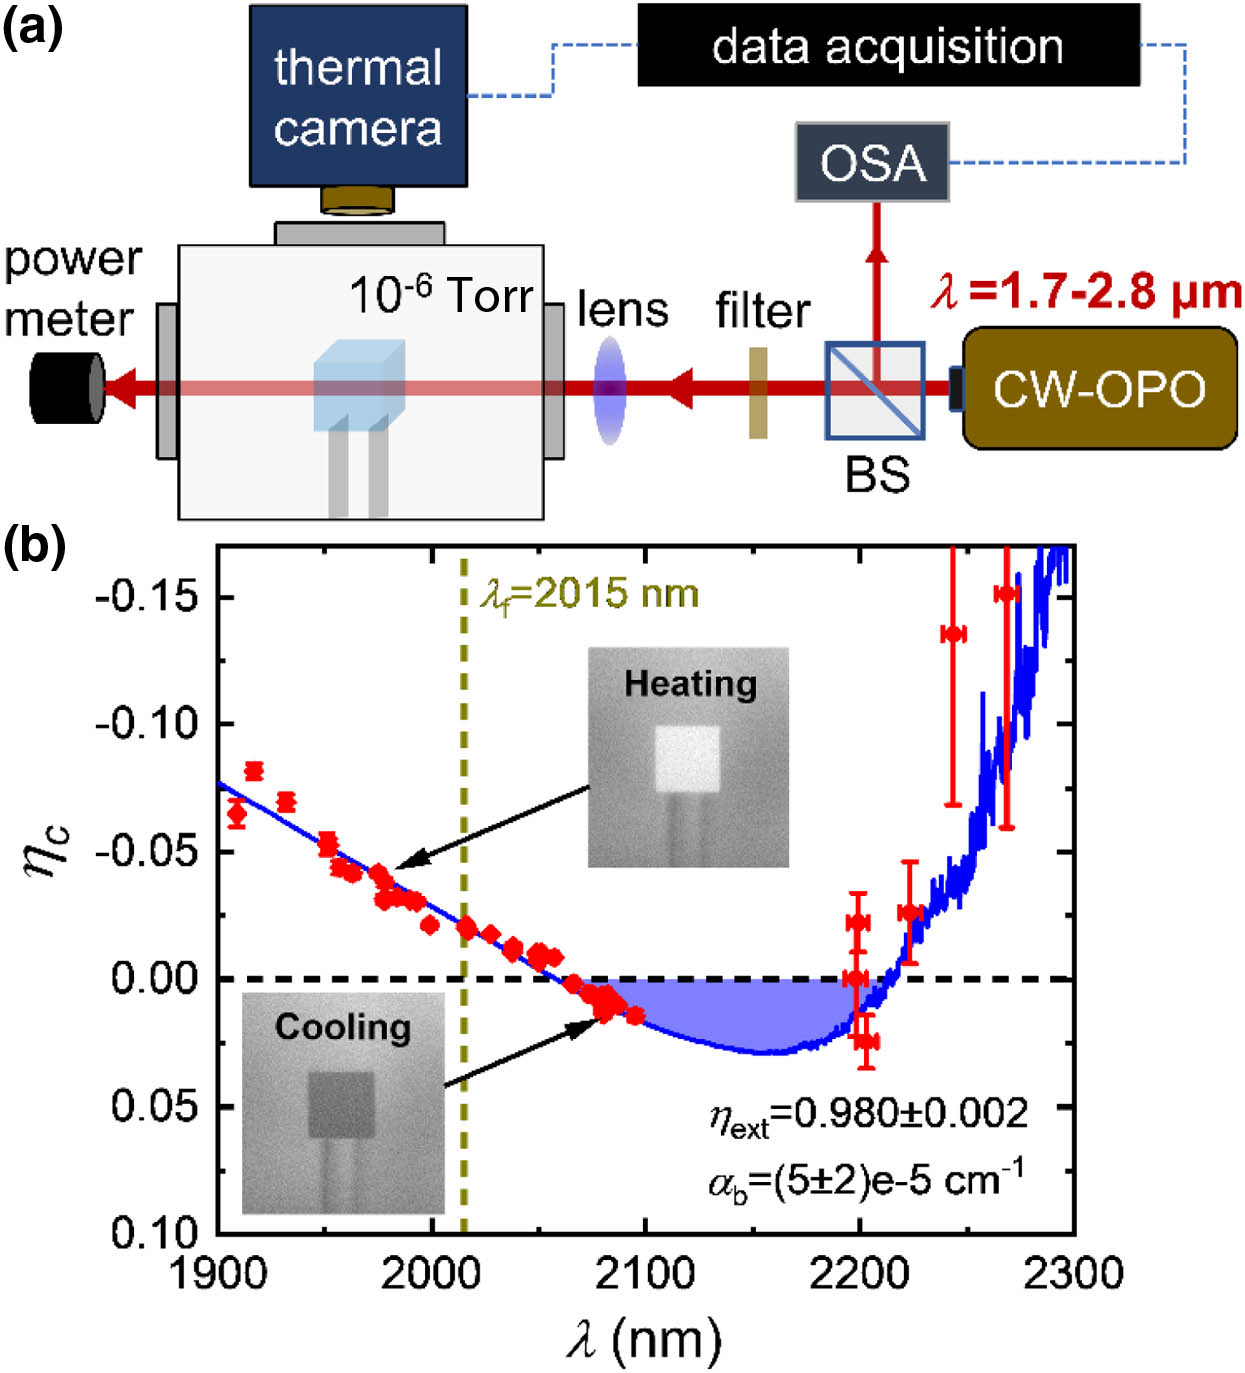 (a) Schematic of mid-IR laser cooling and LITMoS test setup for Ho-doped crystals. (b) LITMoS test result for 1% Ho:YLF crystal; the theoretical fit to the data, using Eq. (1), gives the external quantum efficiency (ηext) and the parasitic (background) absorption coefficient (αb). The insets show two thermal images corresponding to heating and cooling regimes.